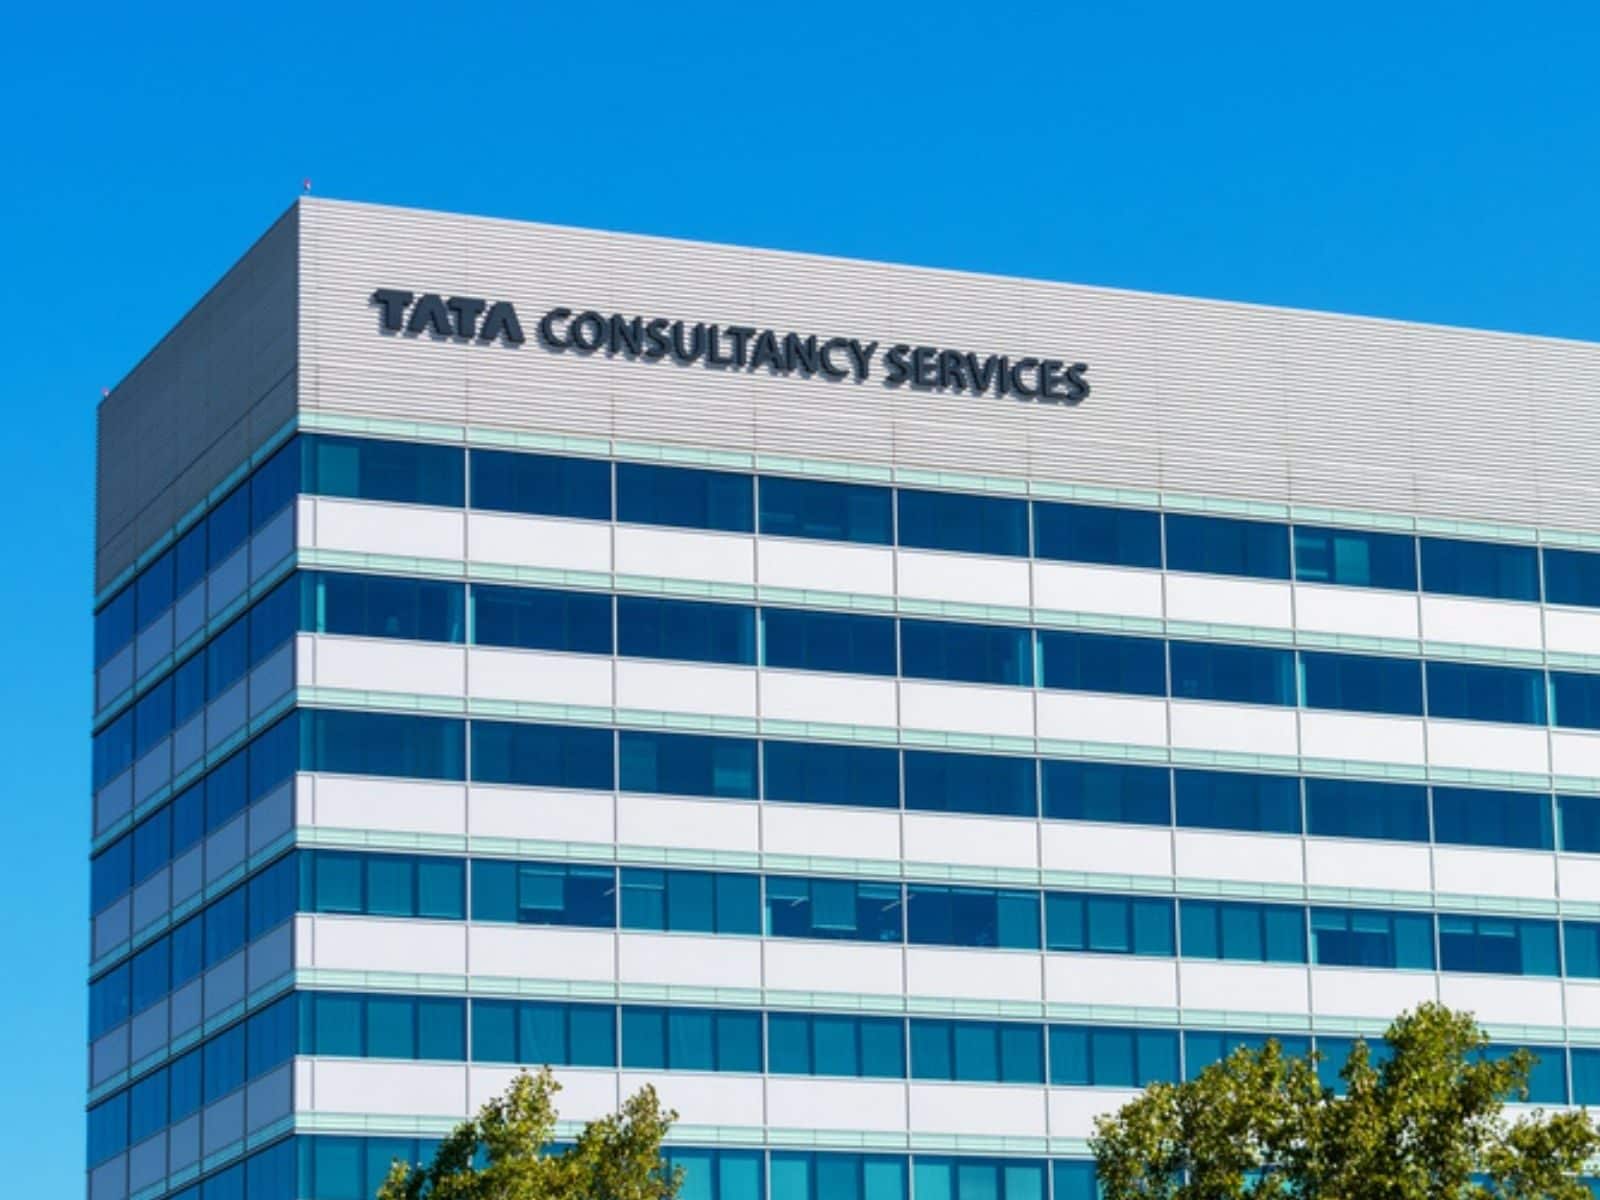 TCS Adds 14,136 Employees in Q1FY23, Crosses 600,000 Headcount; Attrition  Rate Rises - News18